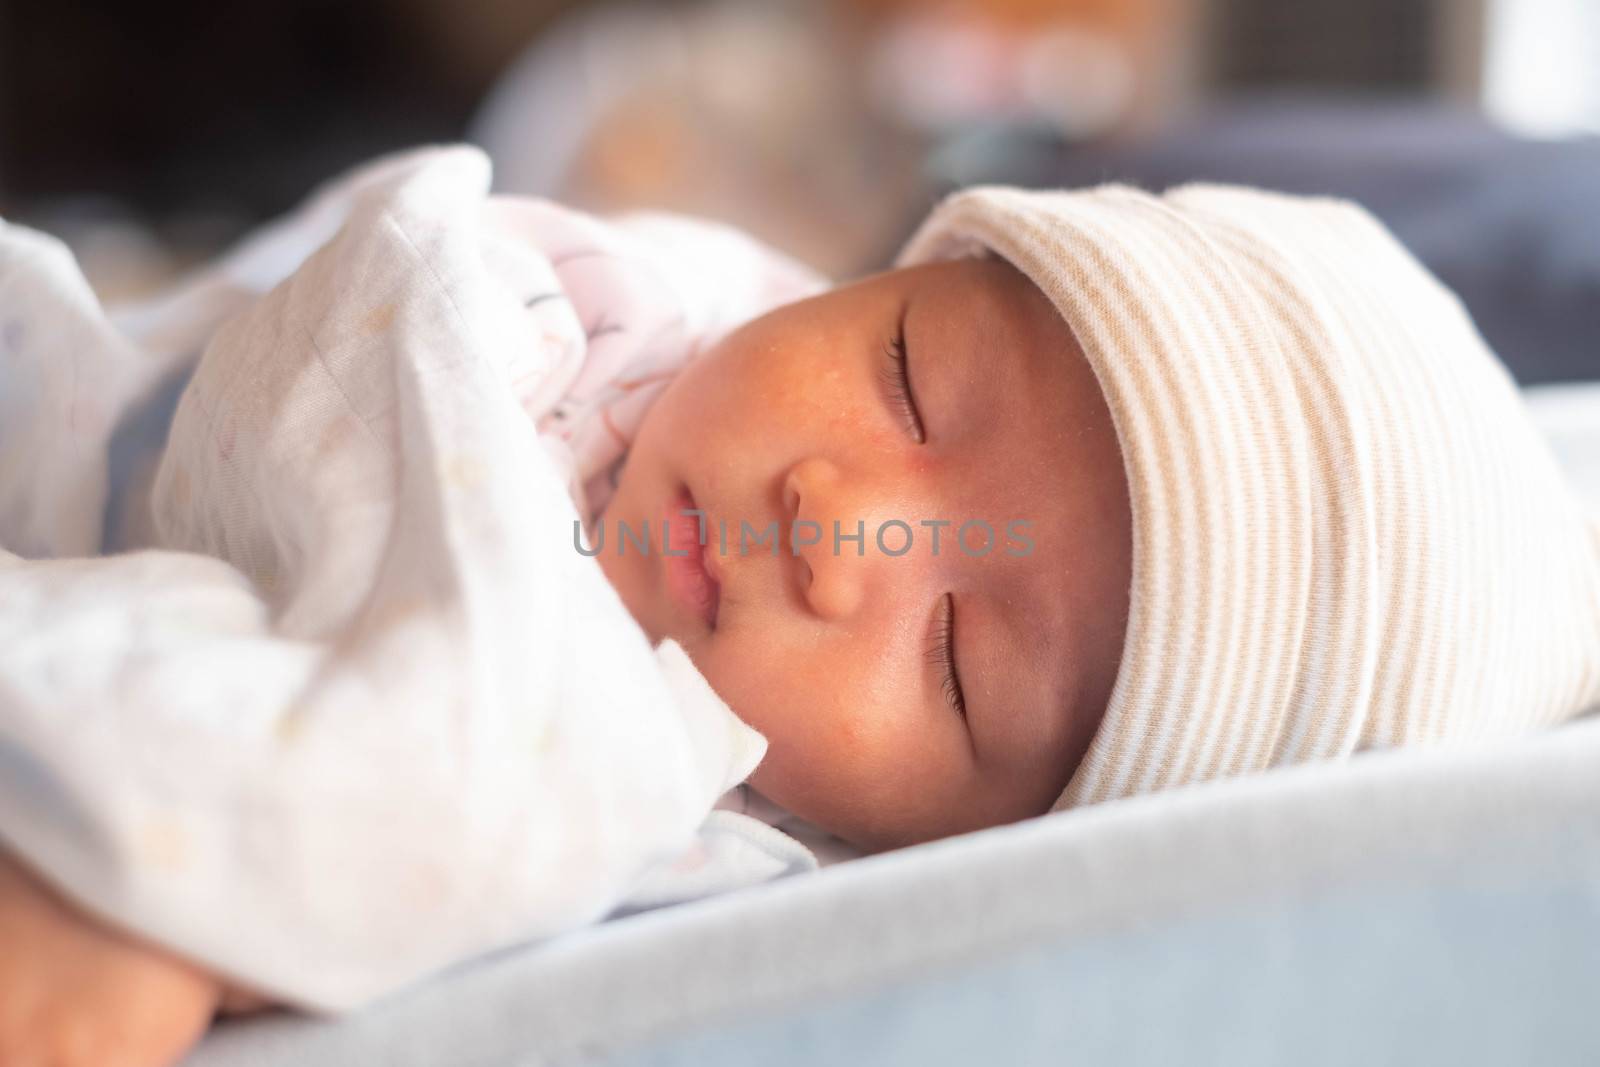 The Sleeping cute New Born Baby infant with hat on the bed